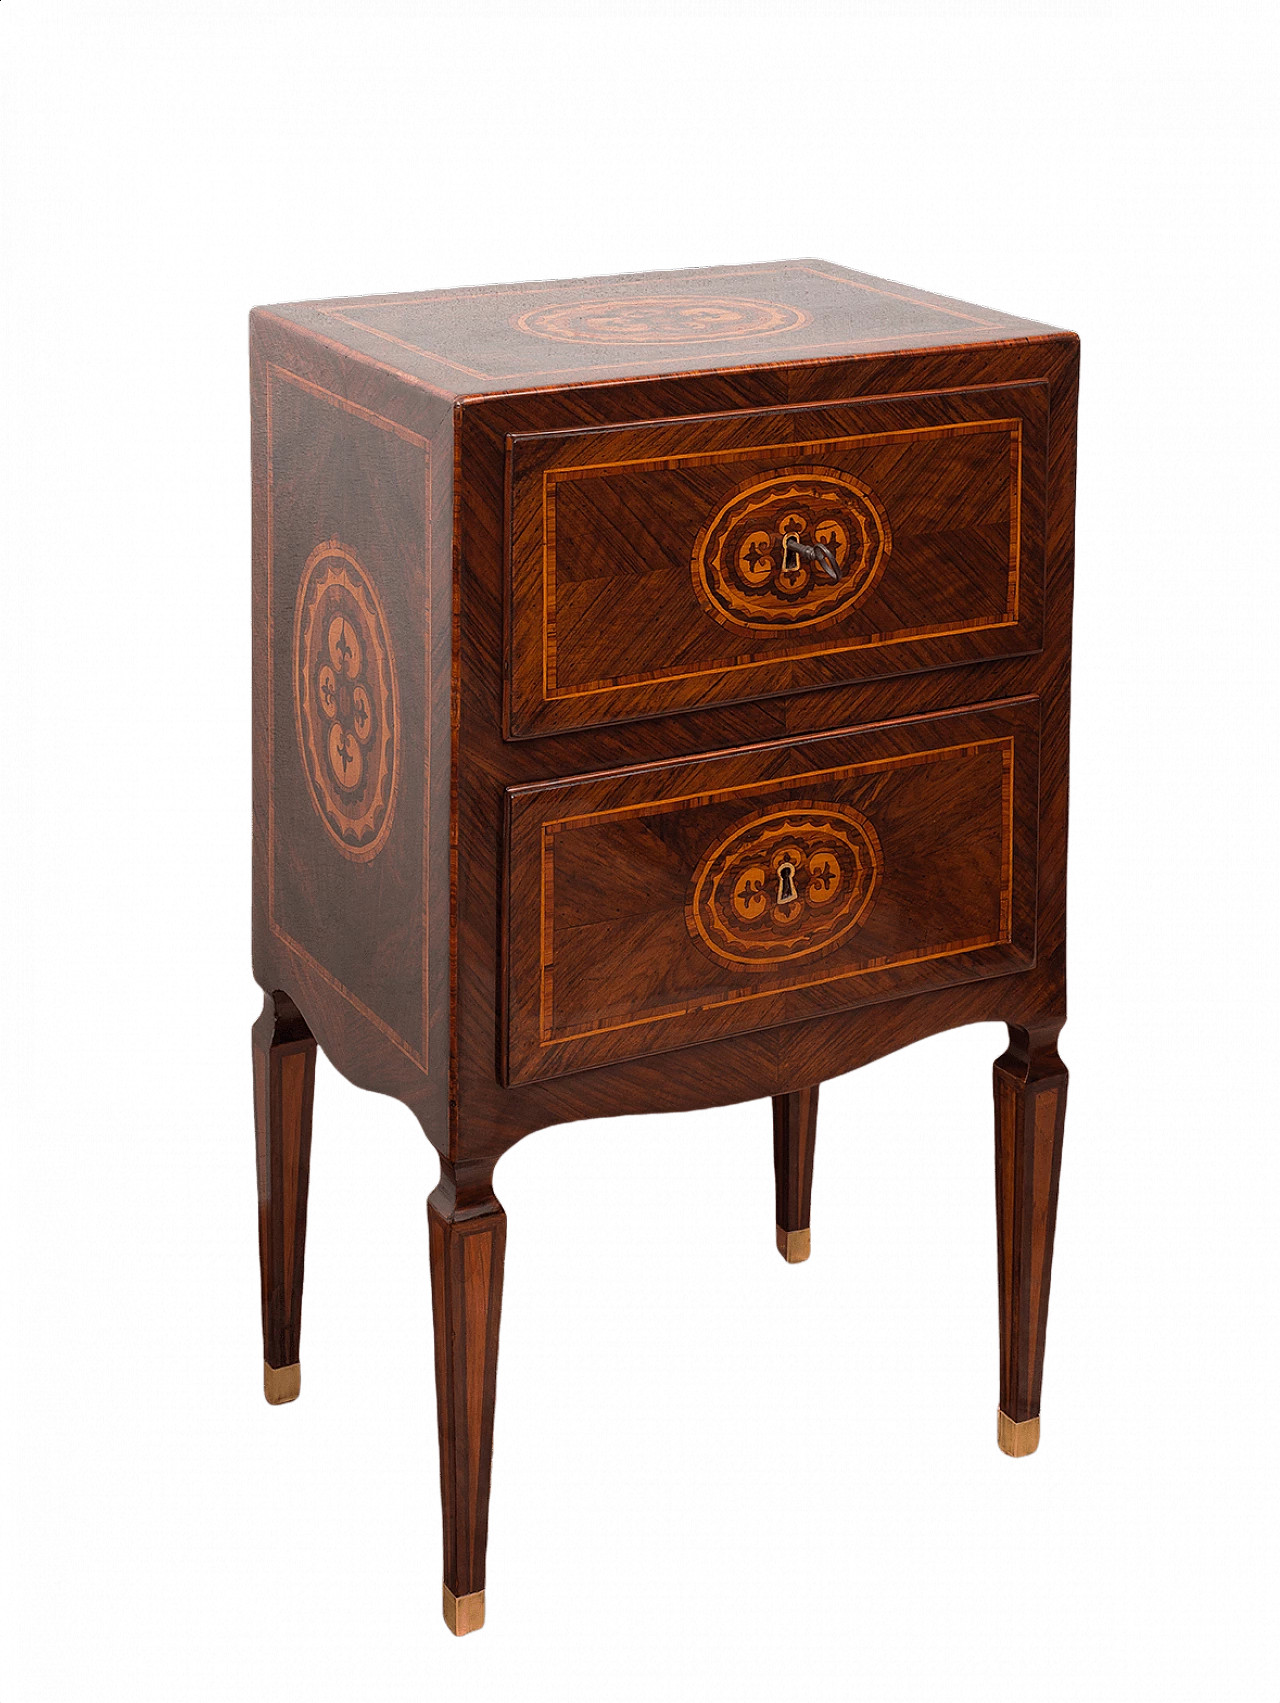 Neapolitan Louis XVI bedside table in exotic woods, 18th century 1370370